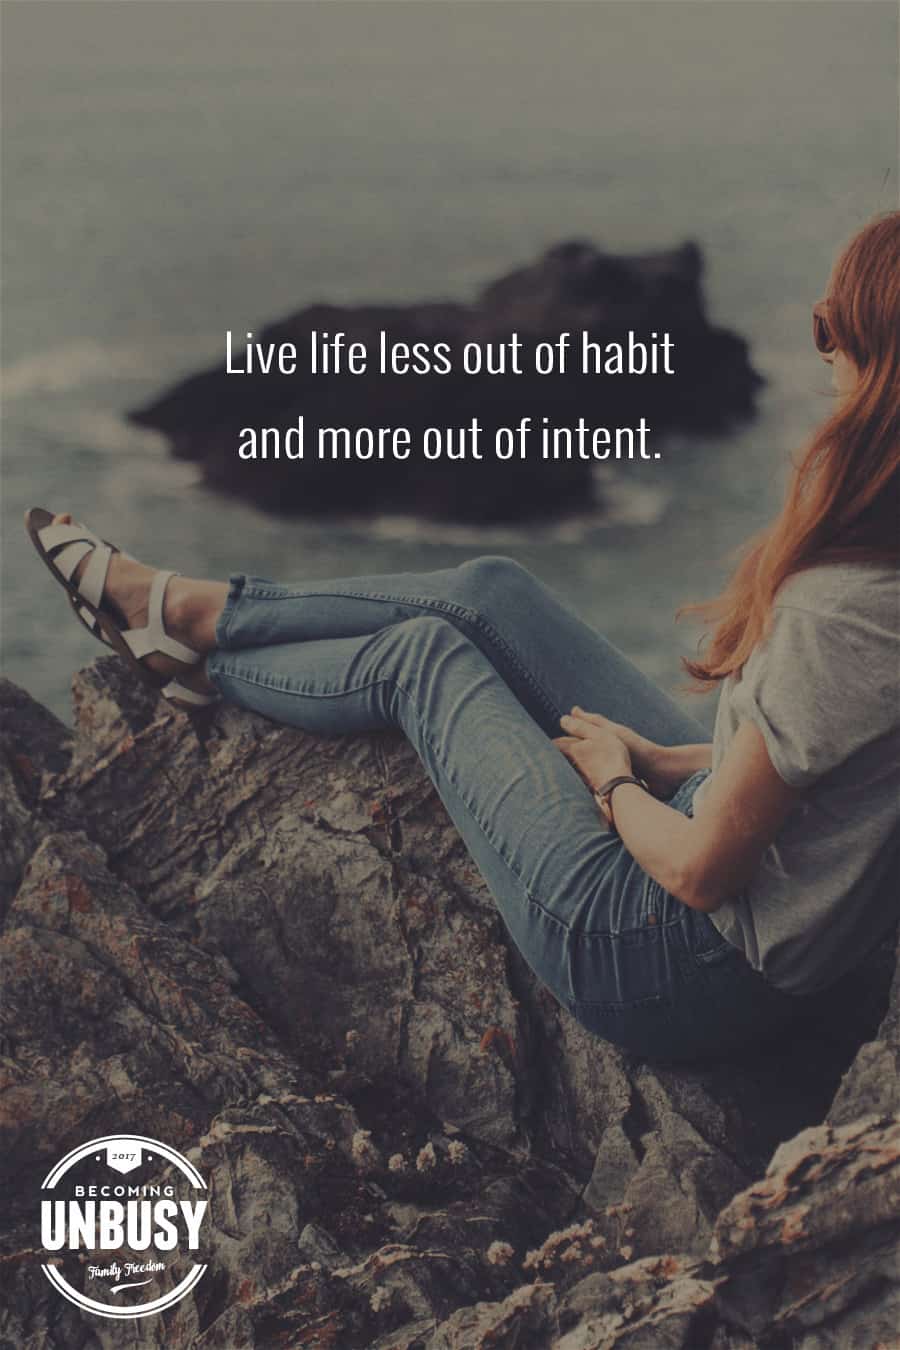 Live life less out of habit and more out of intent. -- 10 inspirational quotes about life that will help you focus on what's important #quotes #lifequotes #inspirationalquotes *Loving this collection of life quotes!